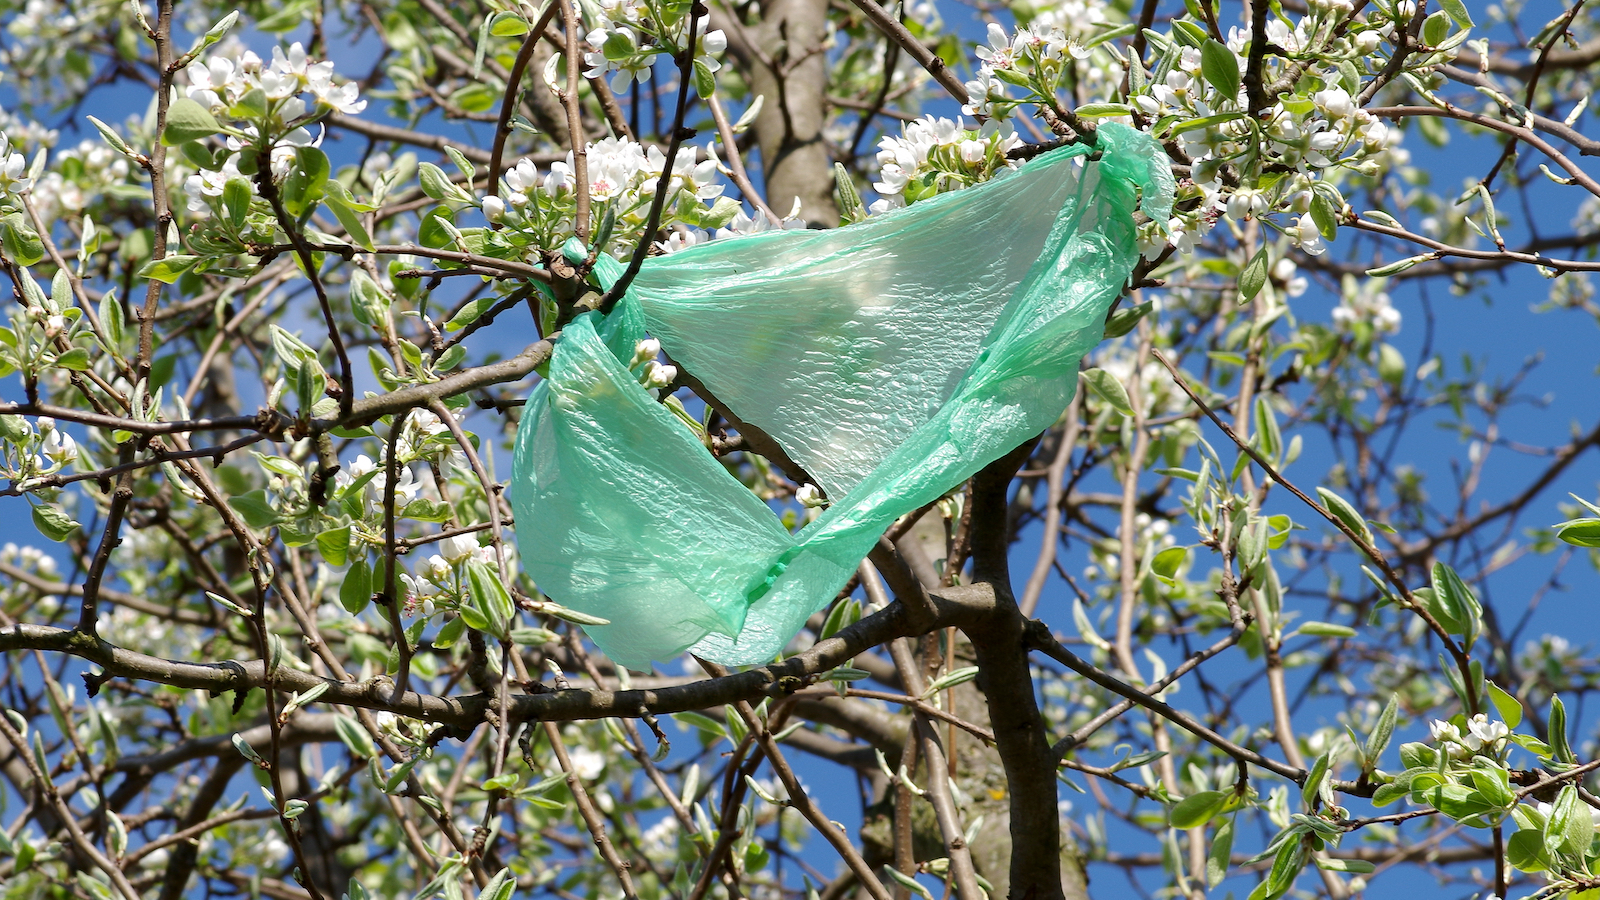 Plastic bag in a tree